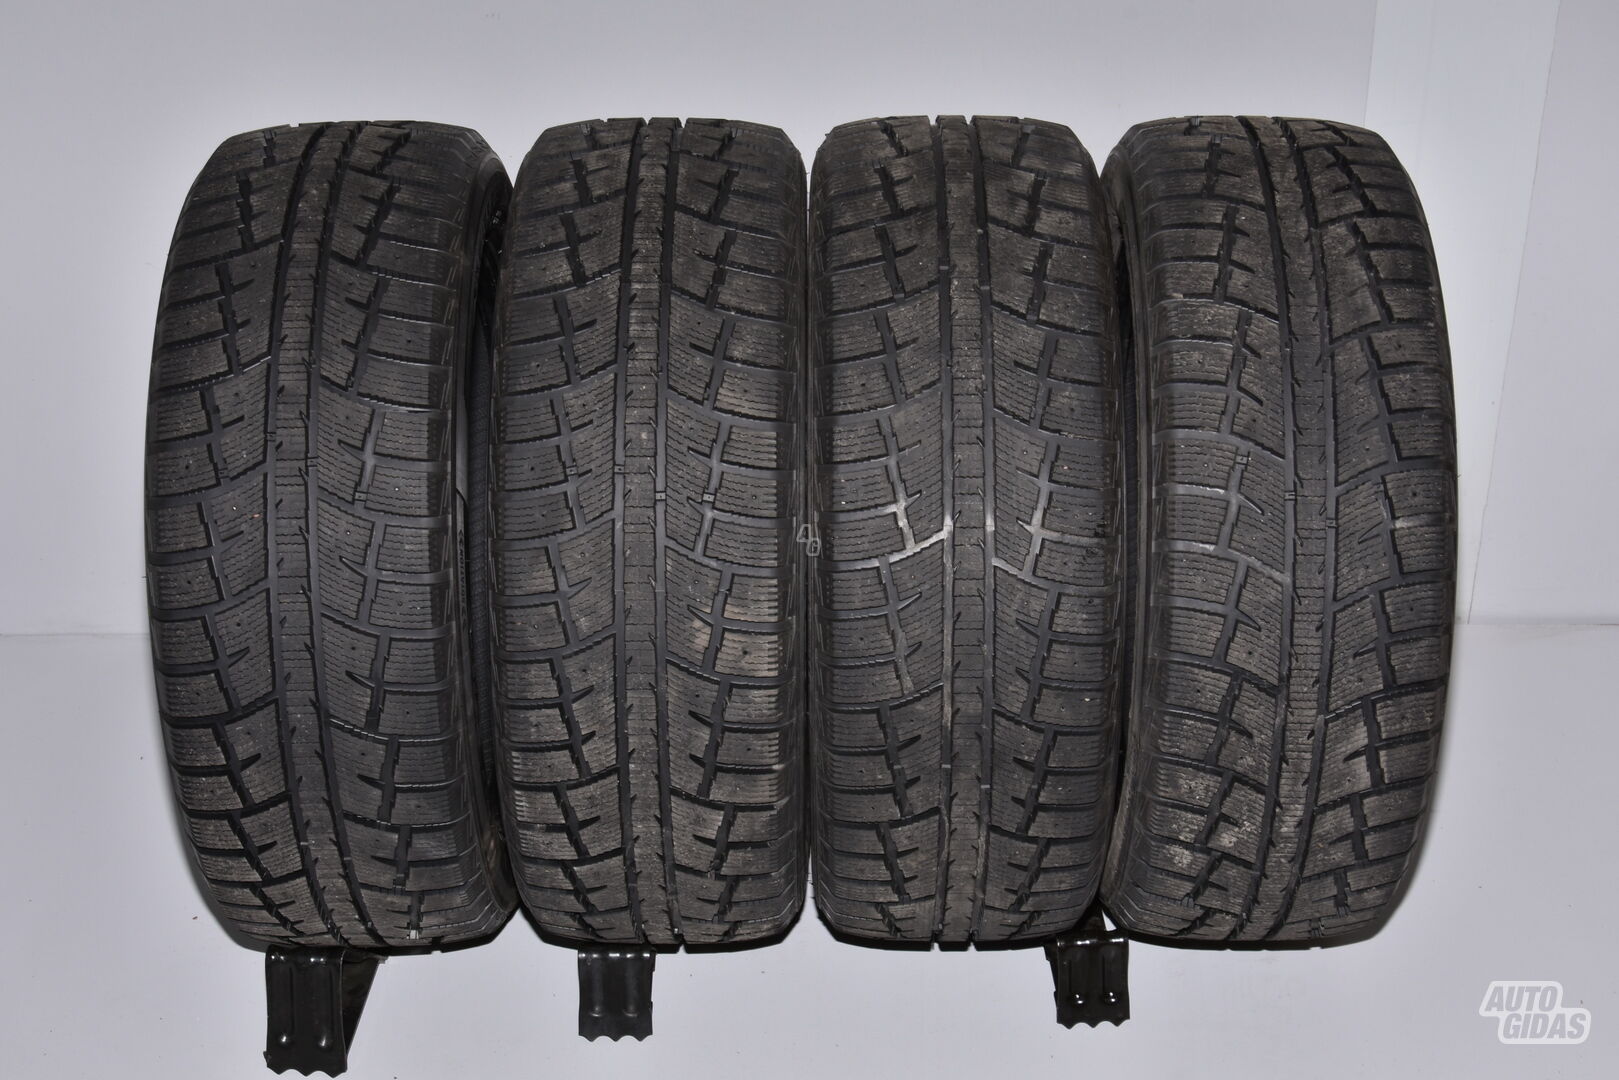 Imperial ECO NORTH-SUV R19 winter tyres passanger car